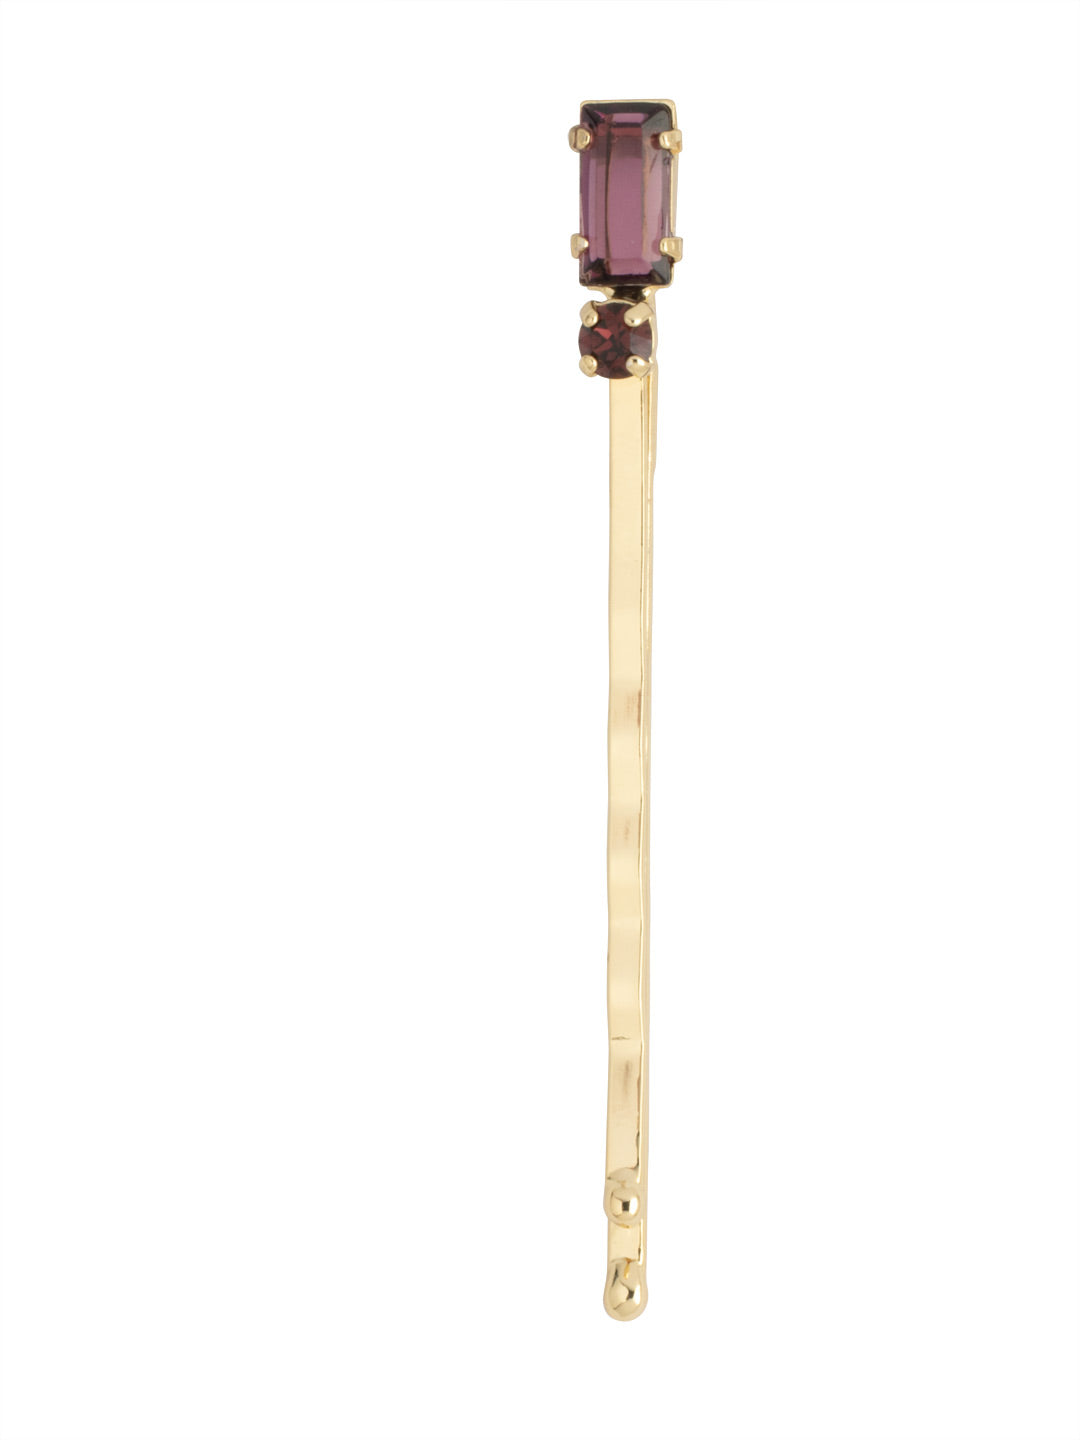 Eve Hair Pin - HFL6BGMRL - <p>The Eve Hair Pin features a navette and round cut crystals on a sturdy bobby pin. From Sorrelli's Merlot collection in our Bright Gold-tone finish.</p>